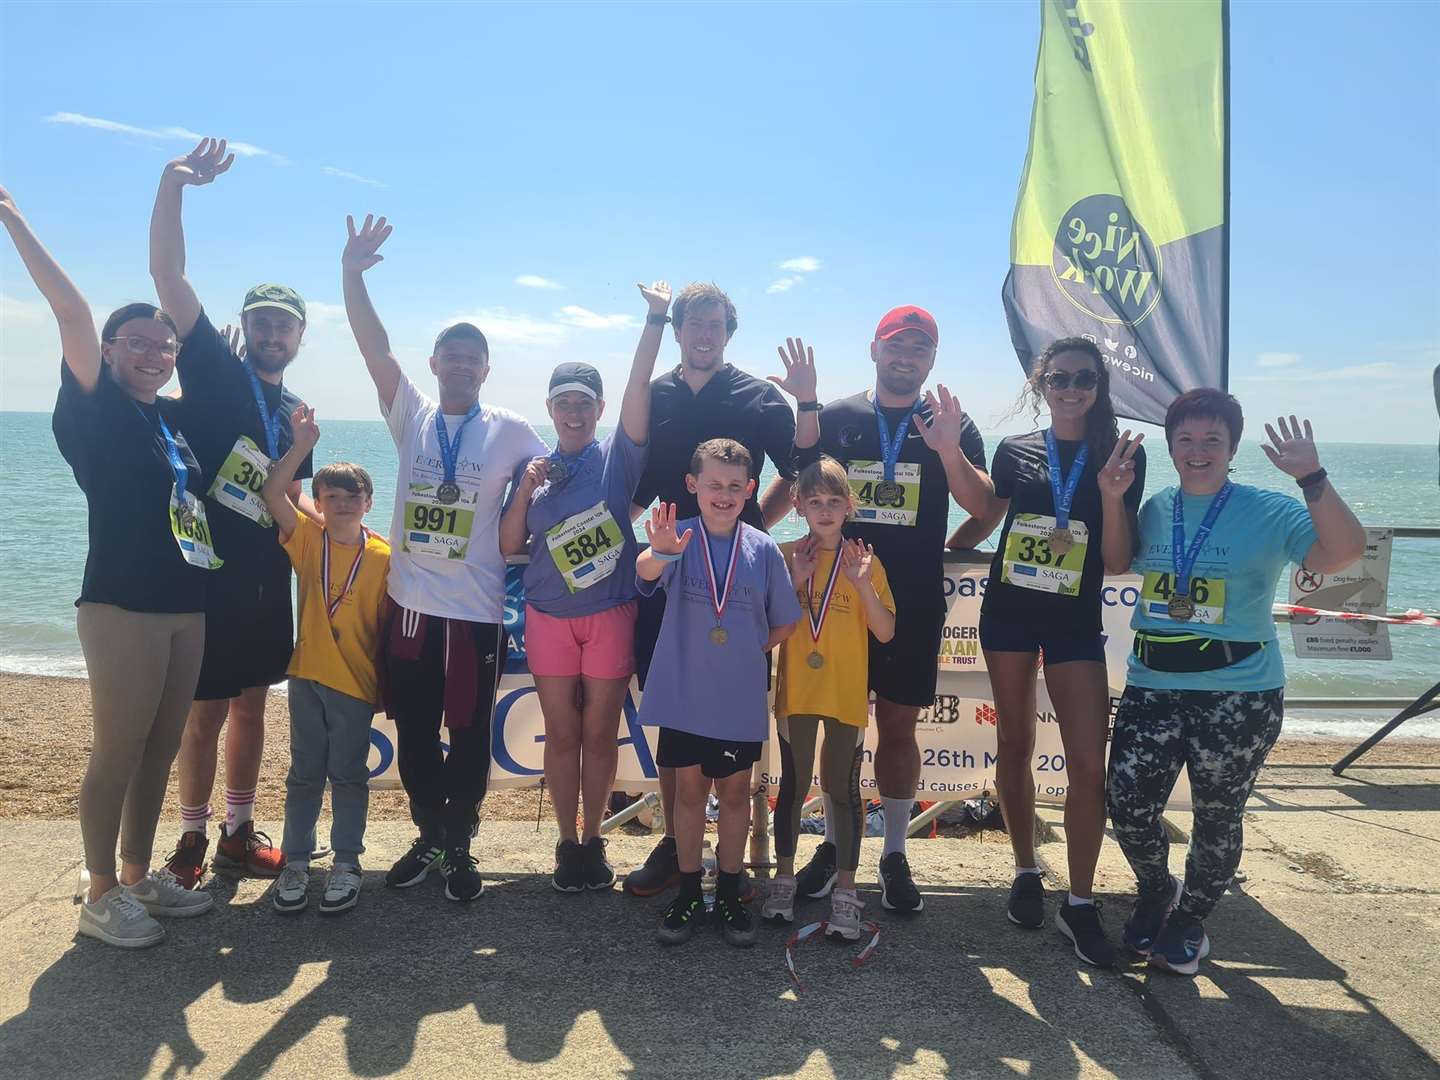 The team from Everglow – The Rebecca Kruza Foundation competed in a 10k run on May 26 to raise funds for the charity. Picture: Everglow